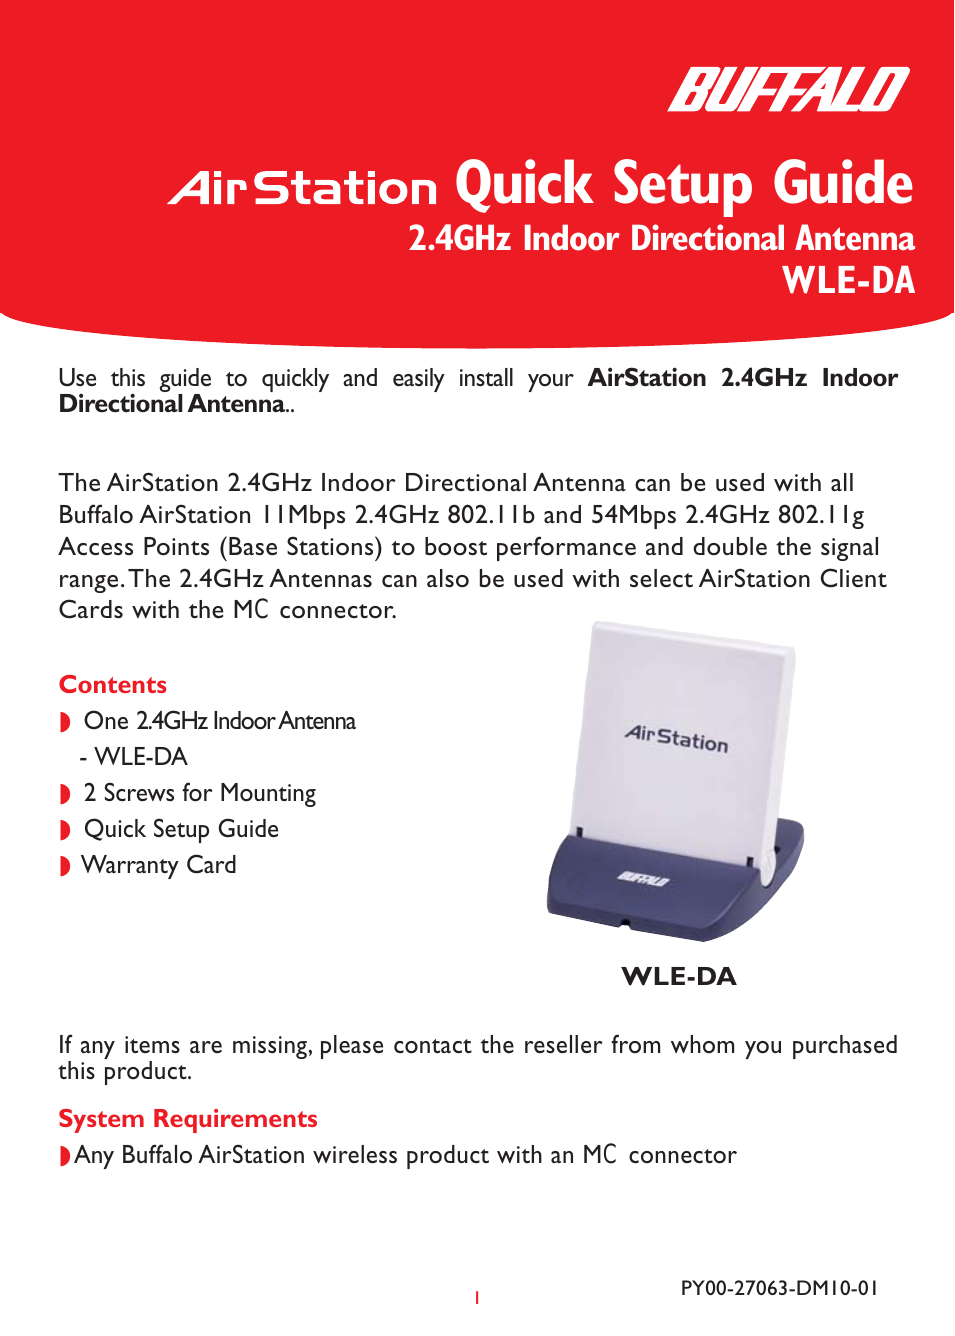 2.Air Station 4GHz Indoor Directional Antenna WLE-DA (Page 1)